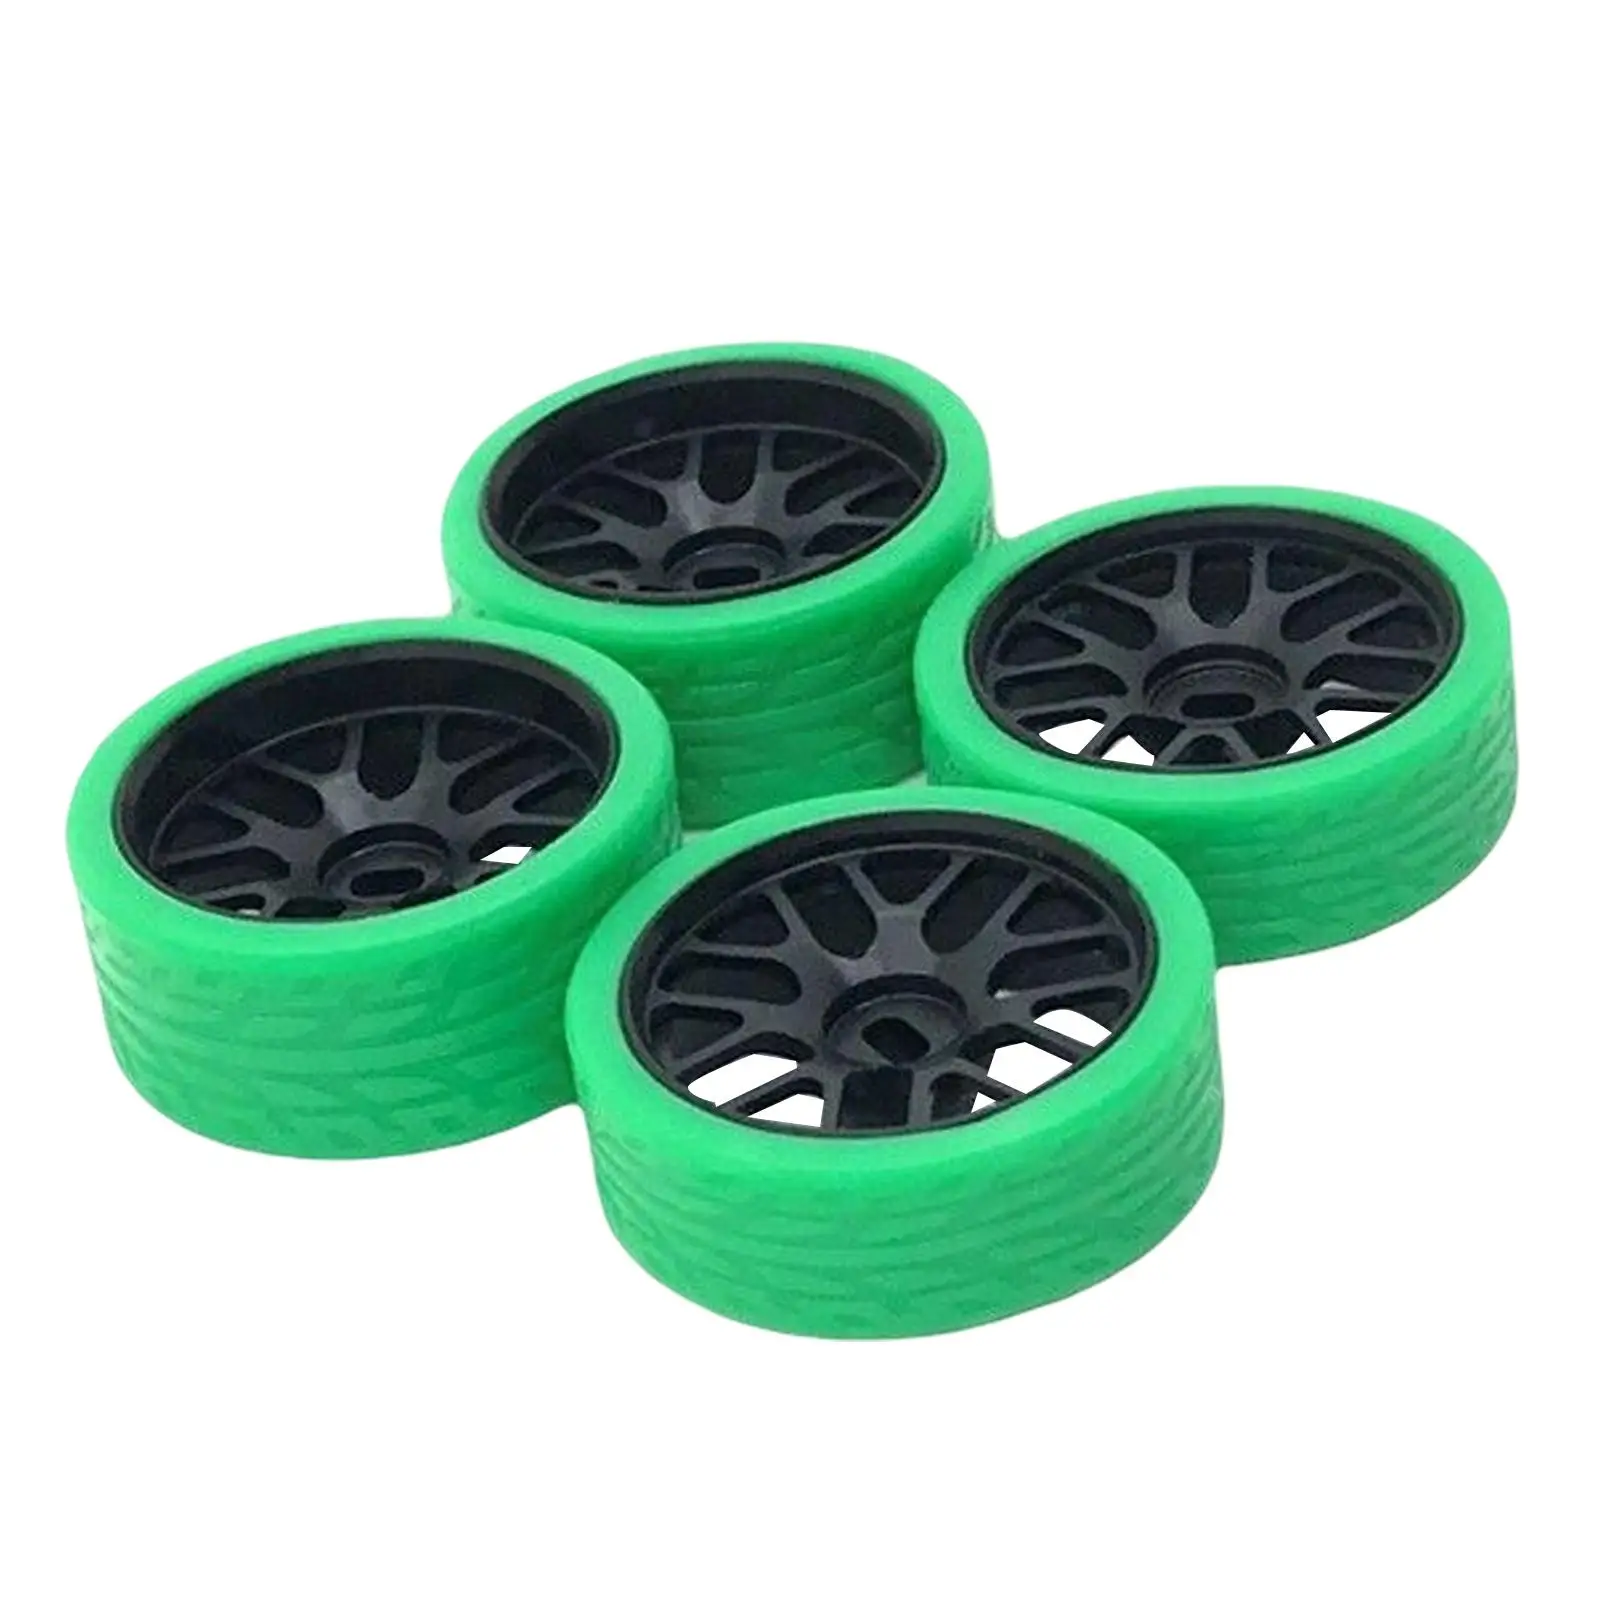 RC Car Wheel Rim Tires Spare Parts Accessories for Wltoys Vehicles